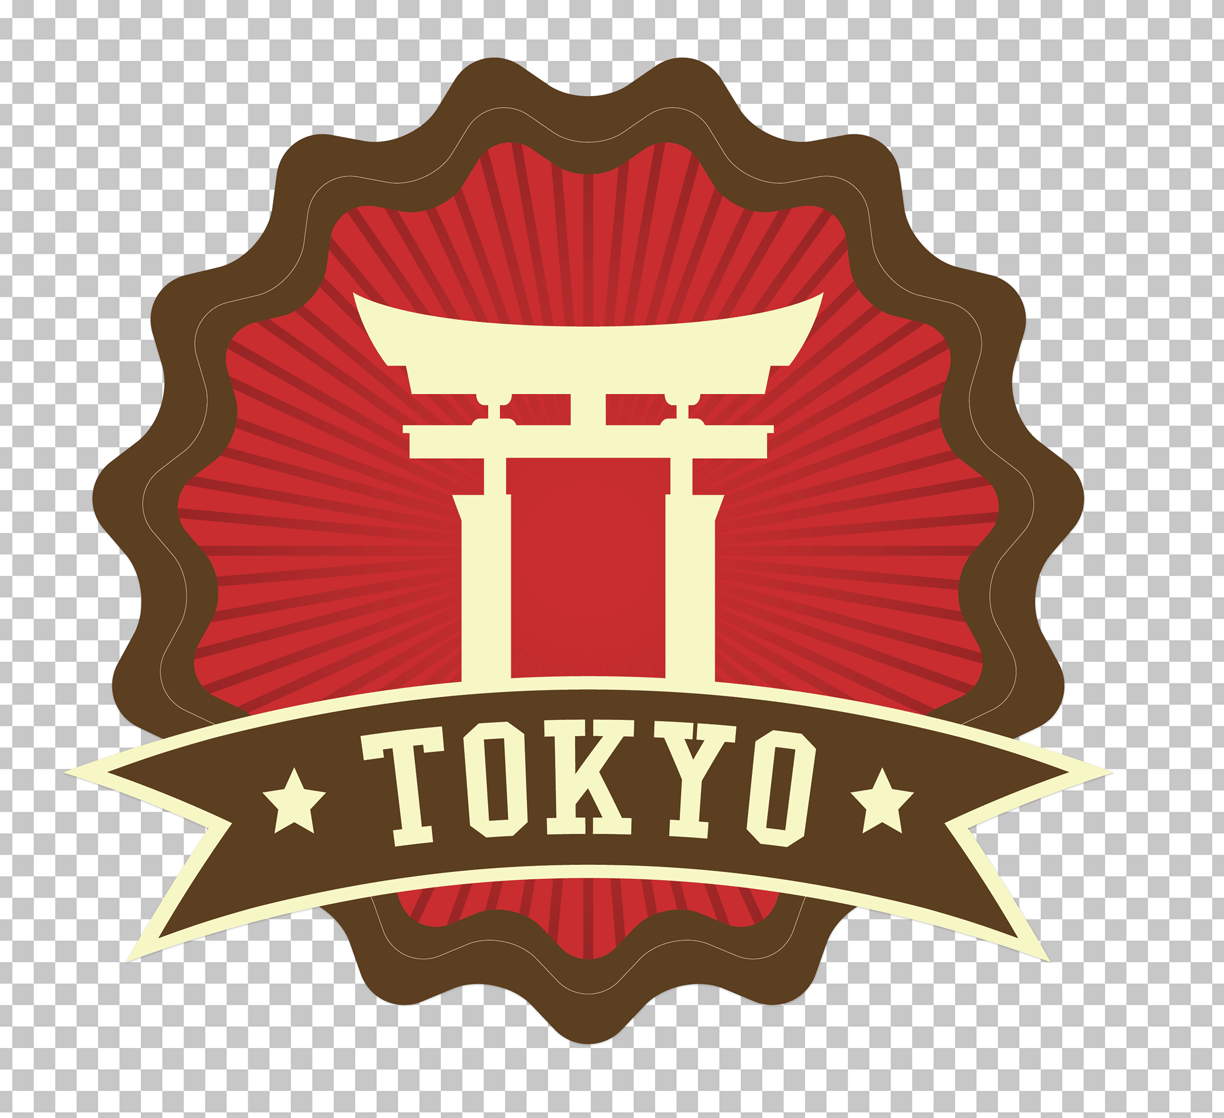 Tokyo Sticker PNG Image with Torii Gate, Red Circle, and Ribbon.